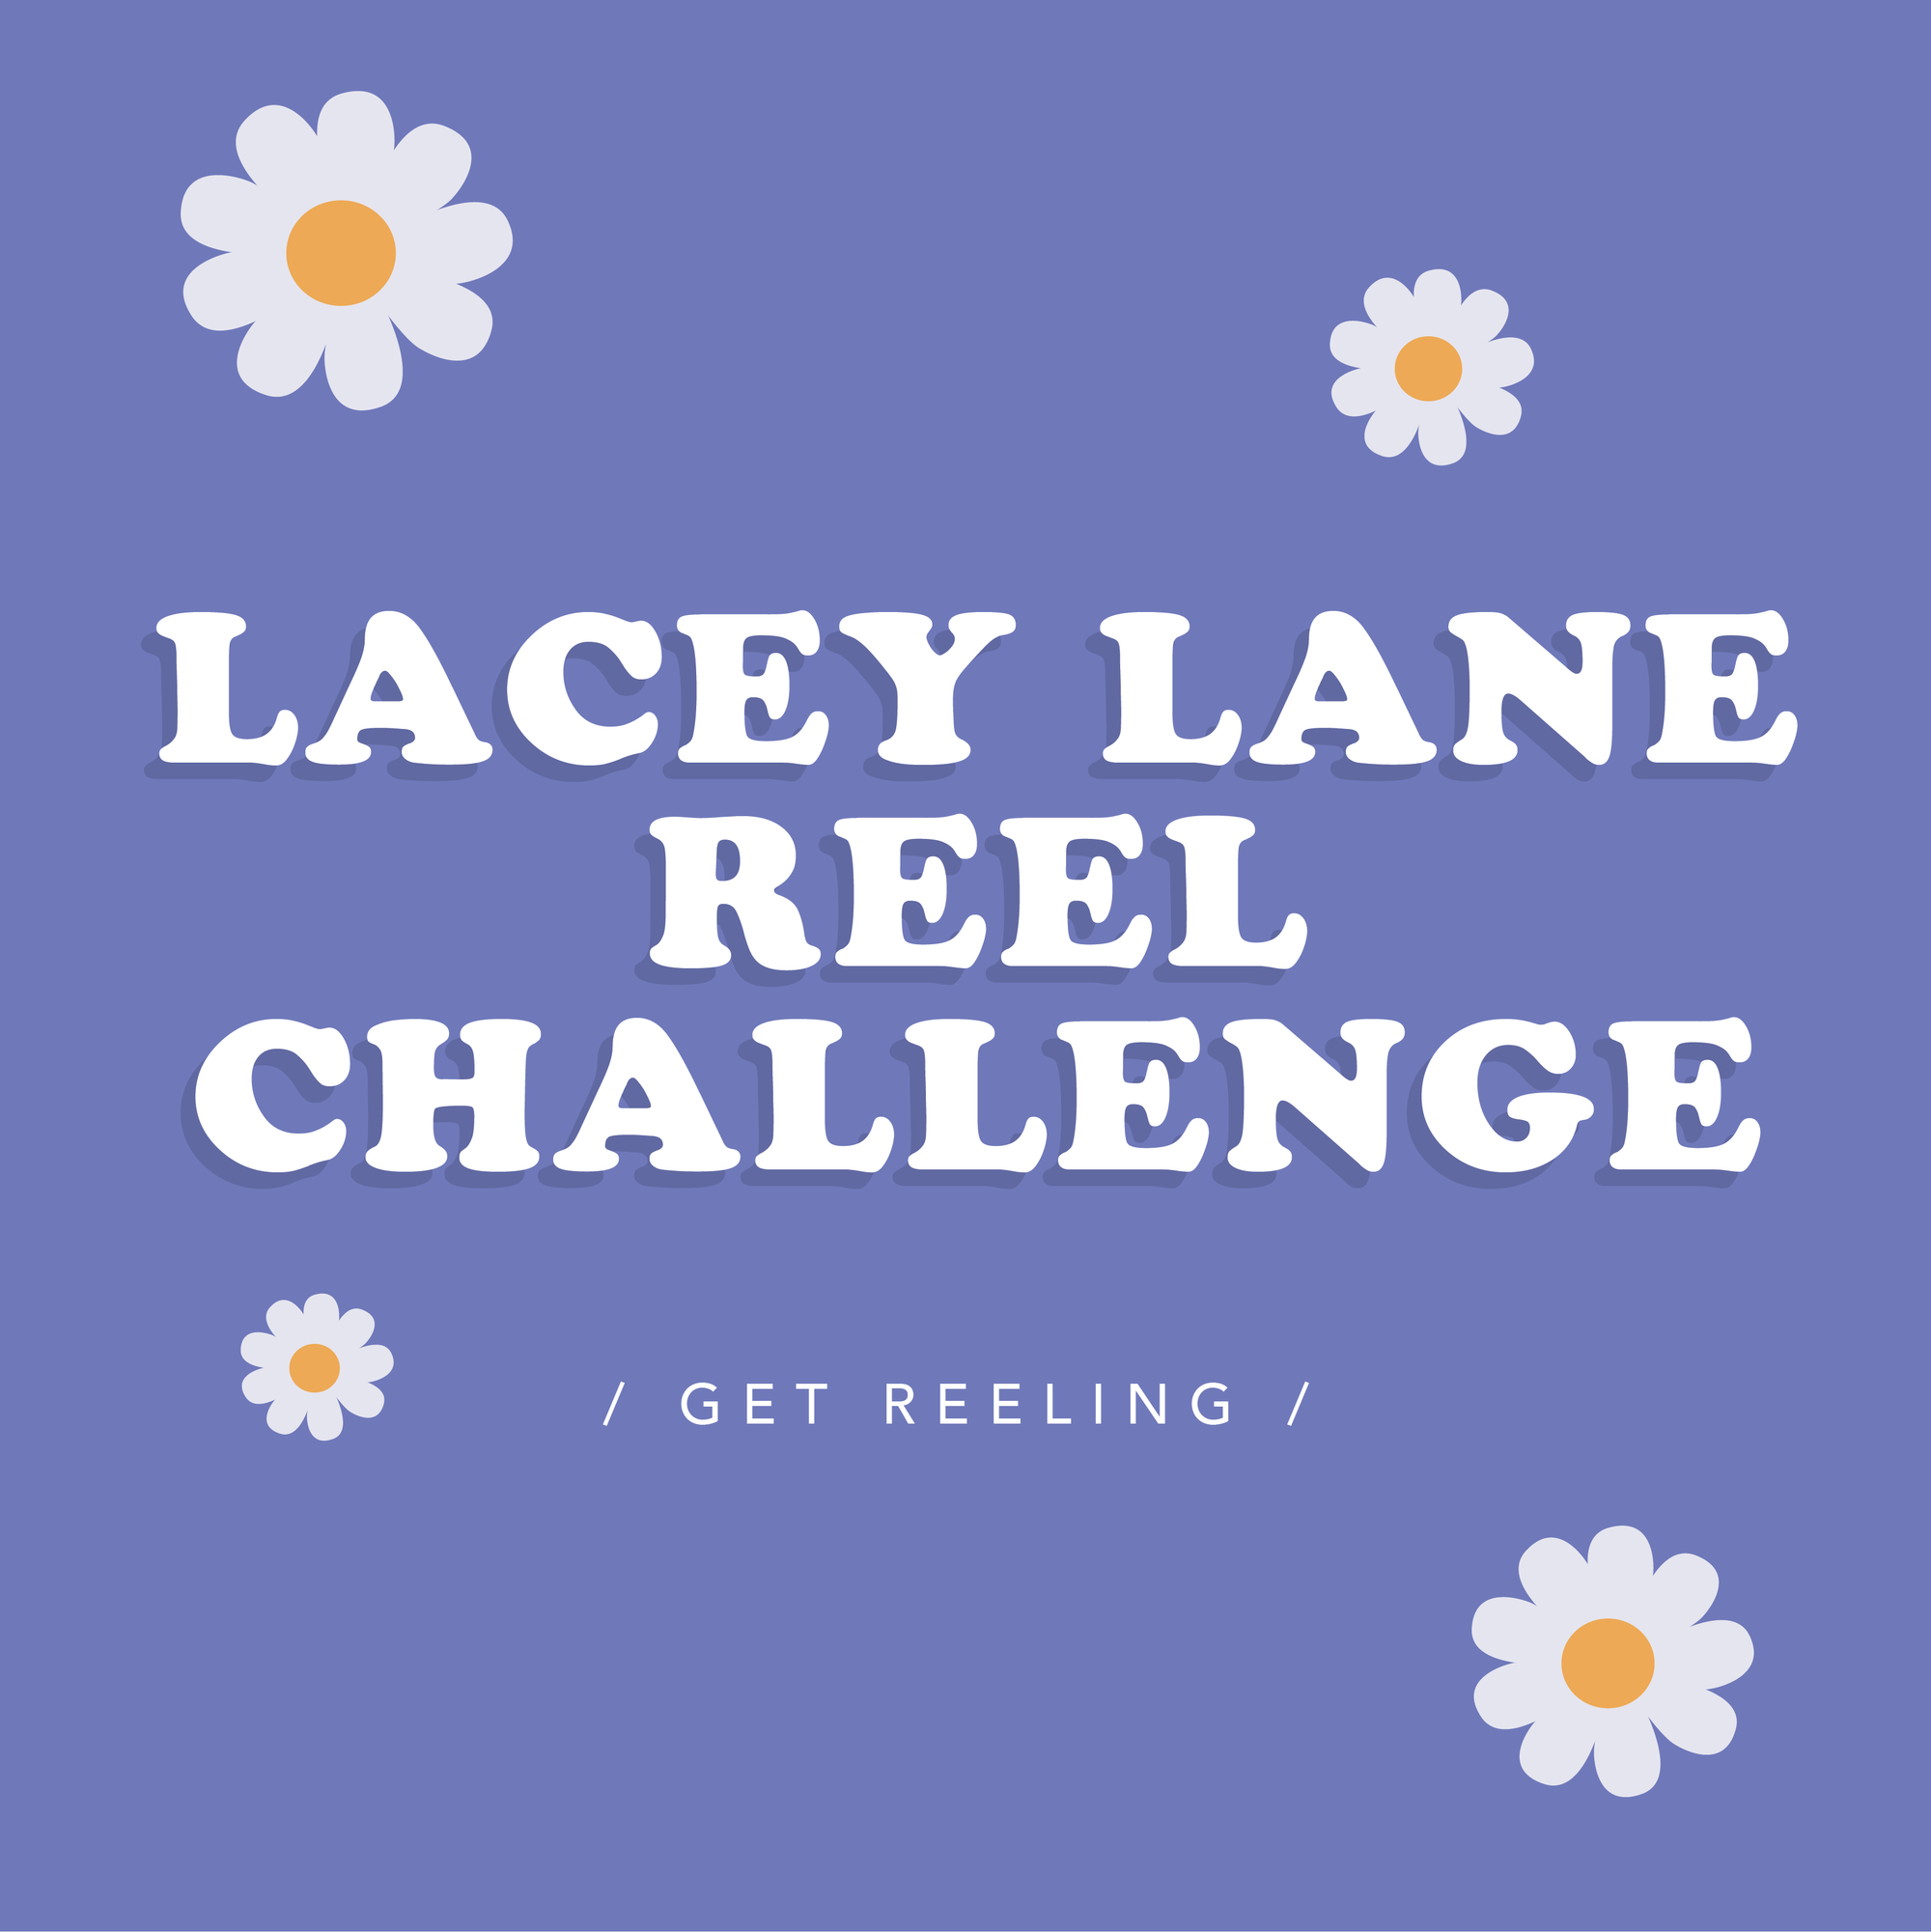 THE LACEY REEL CHALLENGE